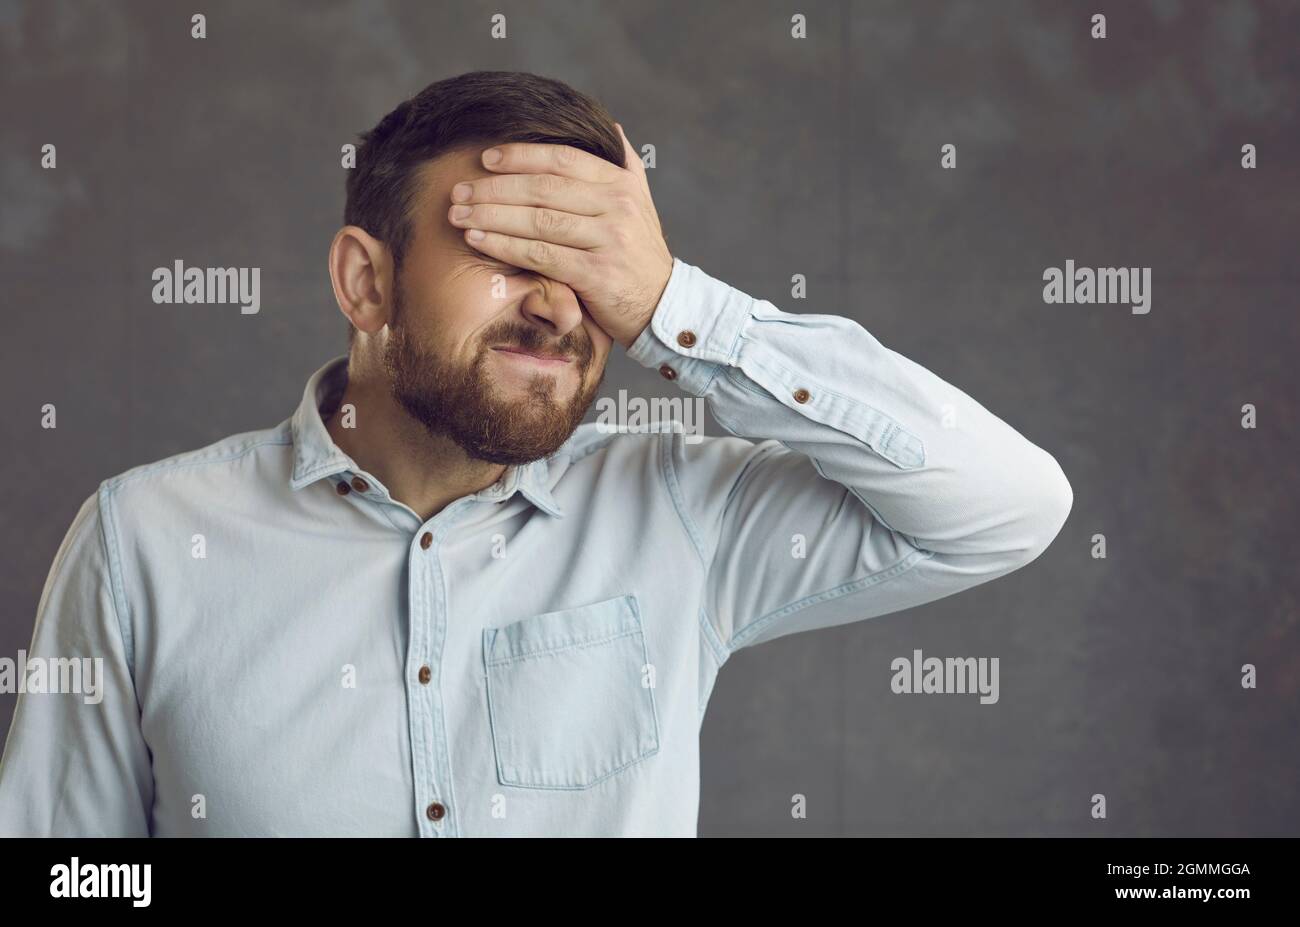 Man facepalming feeling awfully ashamed and embarrassed of a stupid mistake he's made Stock Photo